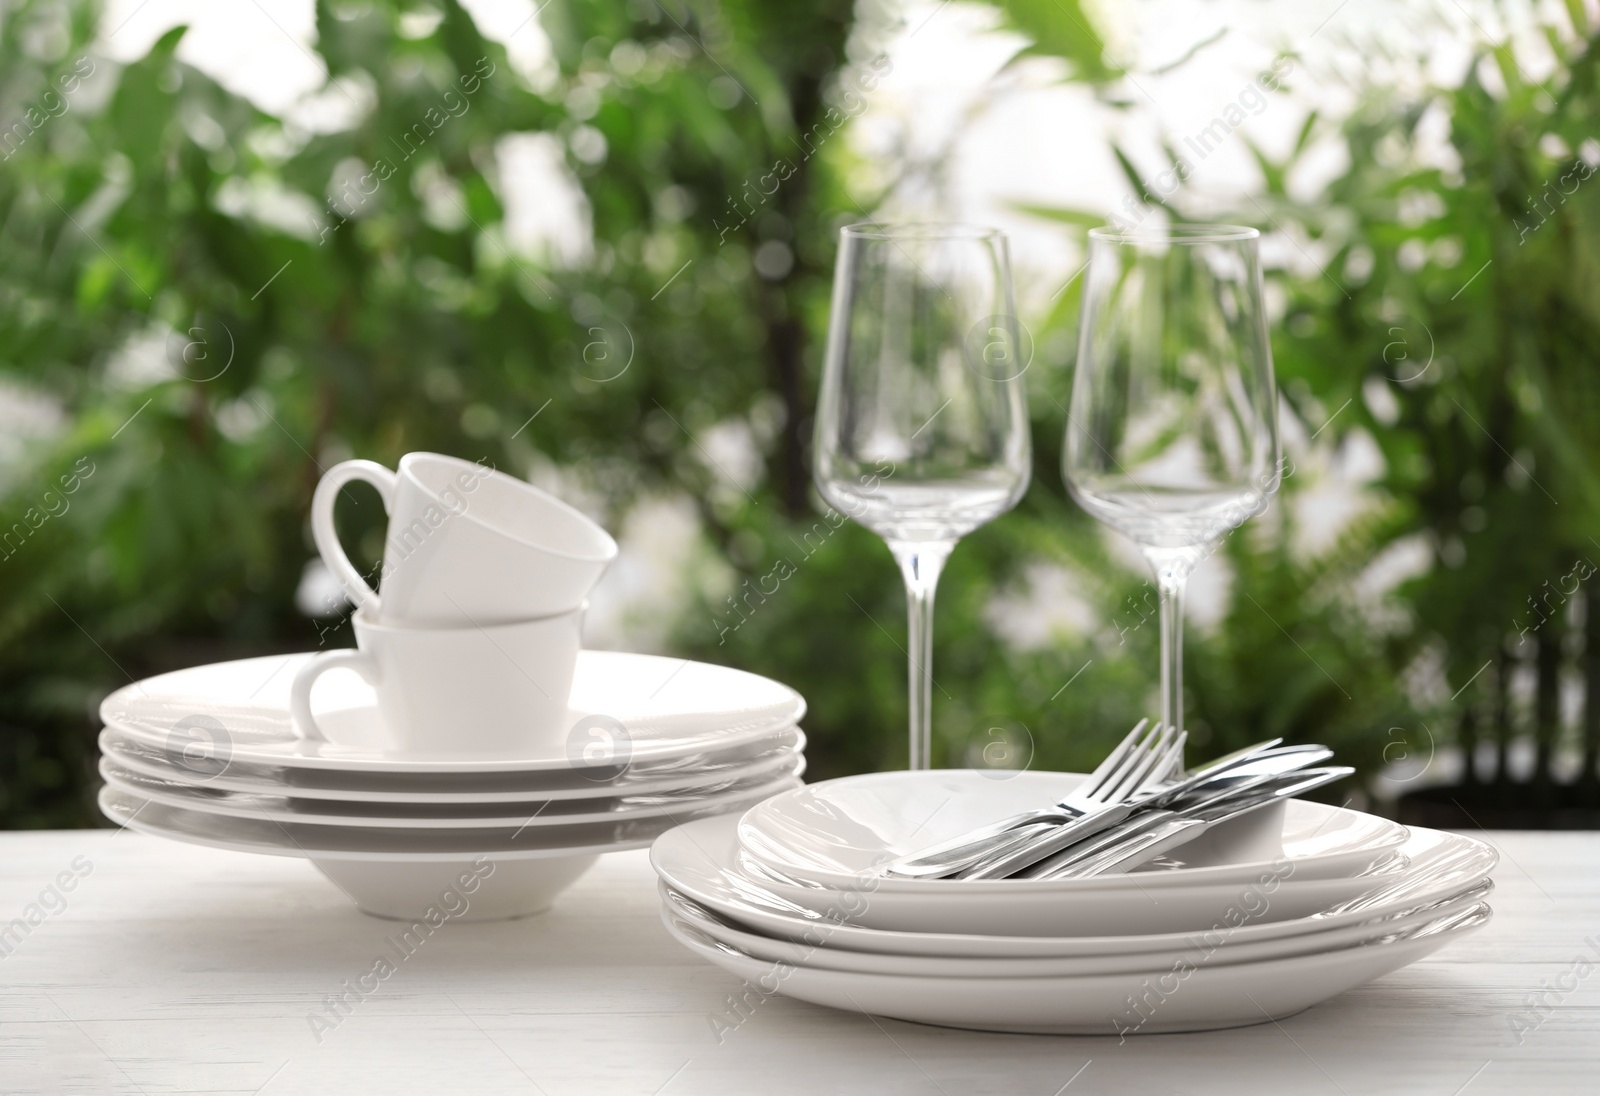 Photo of Set of clean dishware, cutlery and wineglasses on white table against blurred background